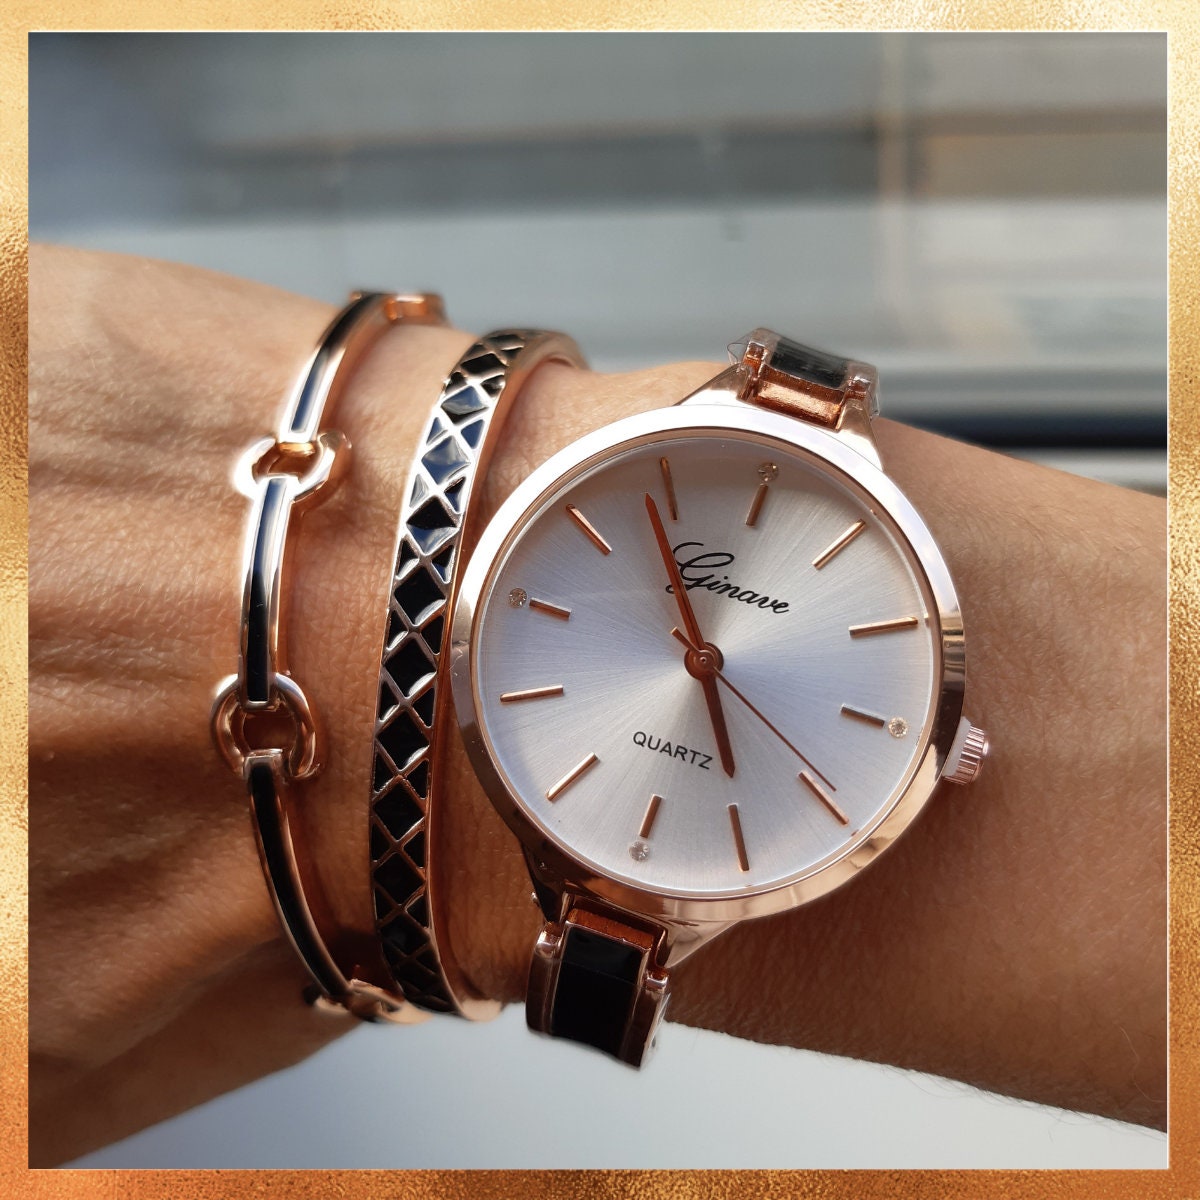 Brand NEW Ladies Quartz Watch with Matching Bracelet  in Bolton  Manchester  Gumtree